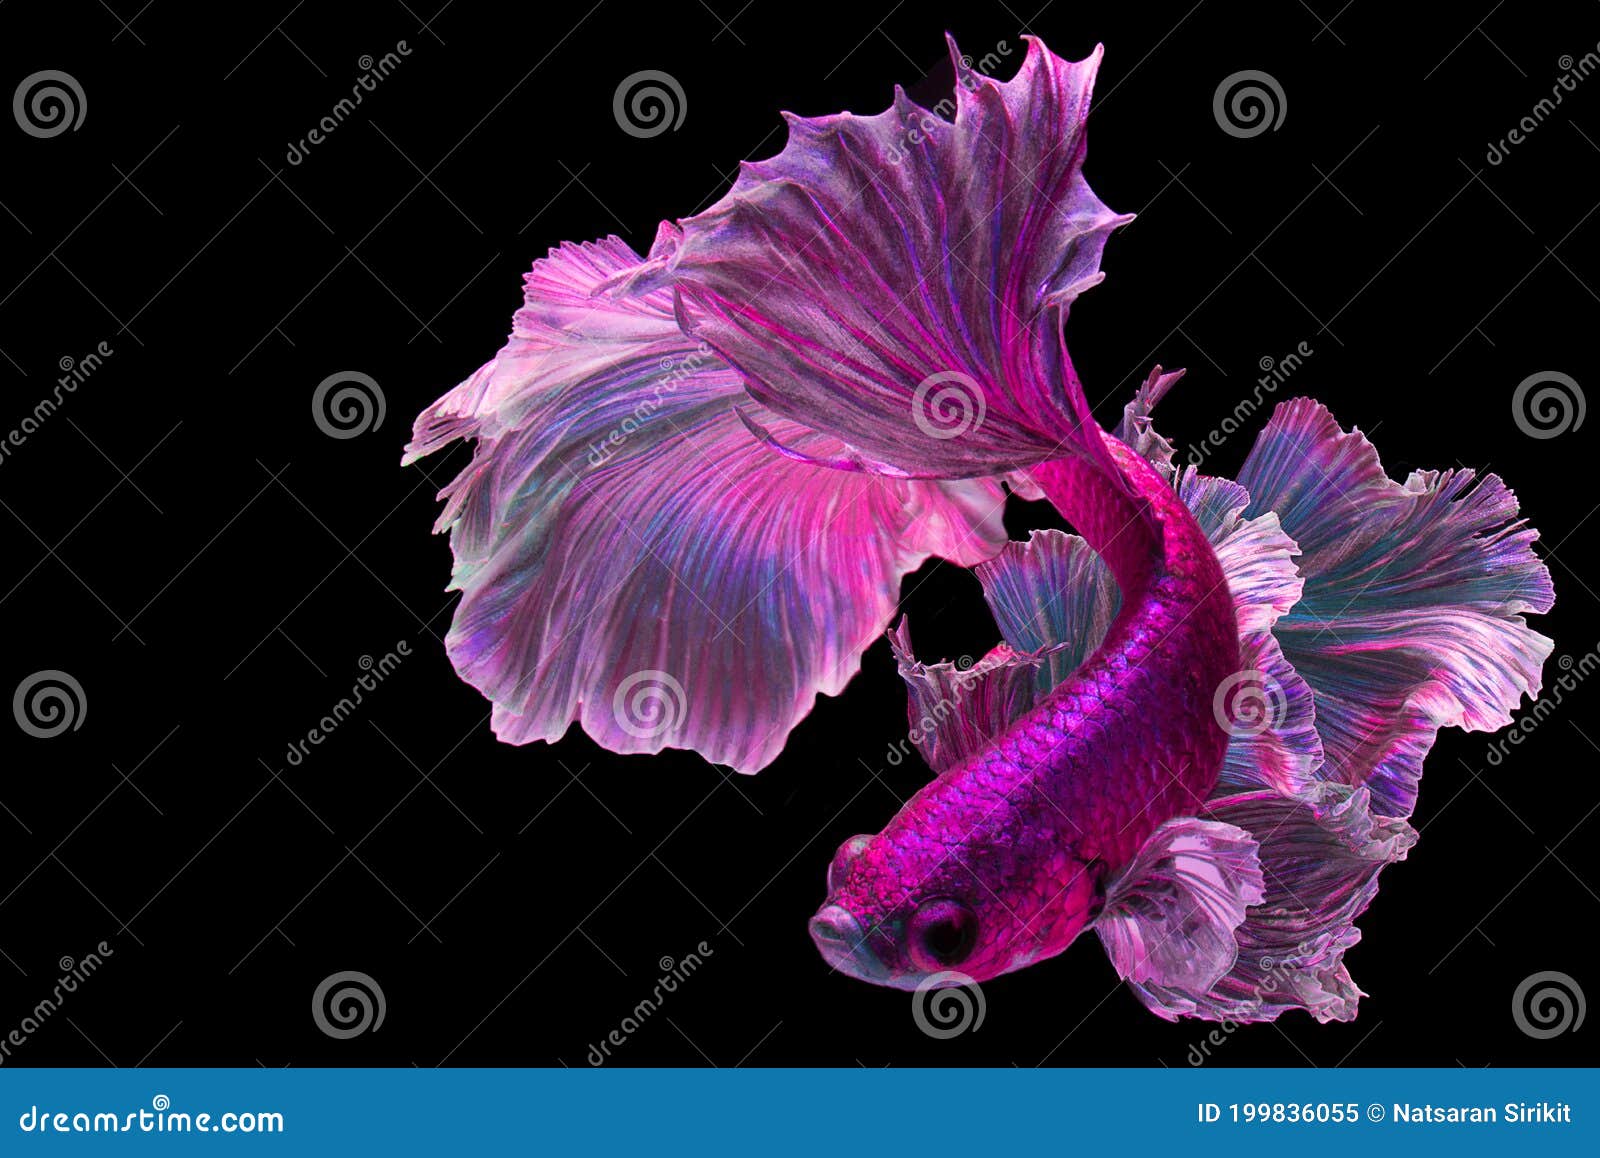 Purple Pink Betta Fish, Fancy Halfmoon Betta, the Moving Moment Beautiful  of Siamese Fighting Fish in Thailand. Stock Image - Image of moment,  golden: 199836055